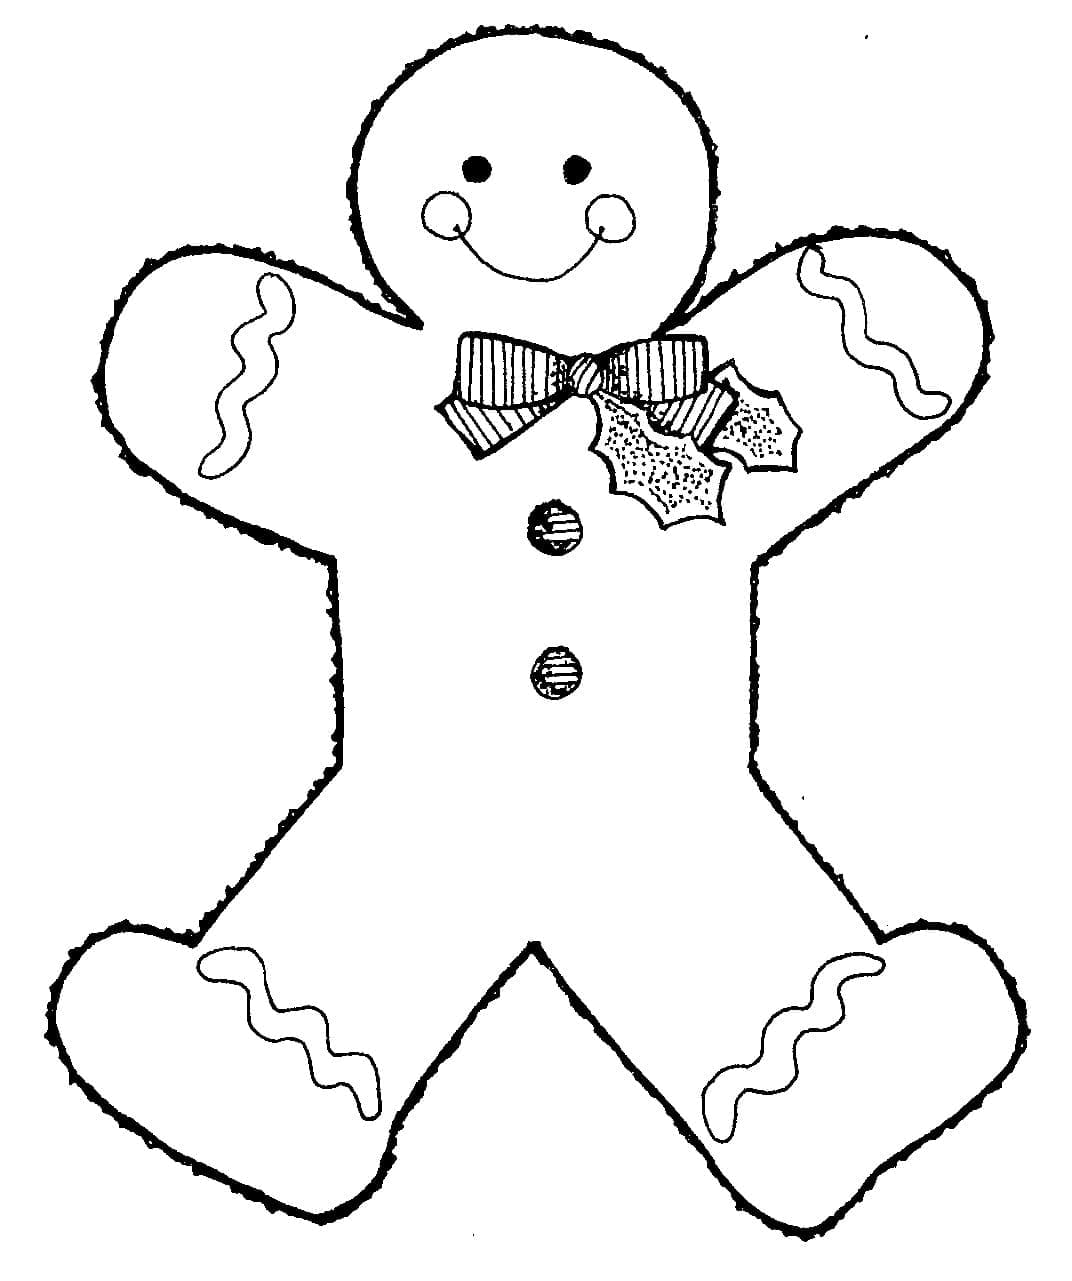 printable-gingerbread-man-coloring-page-download-print-or-color